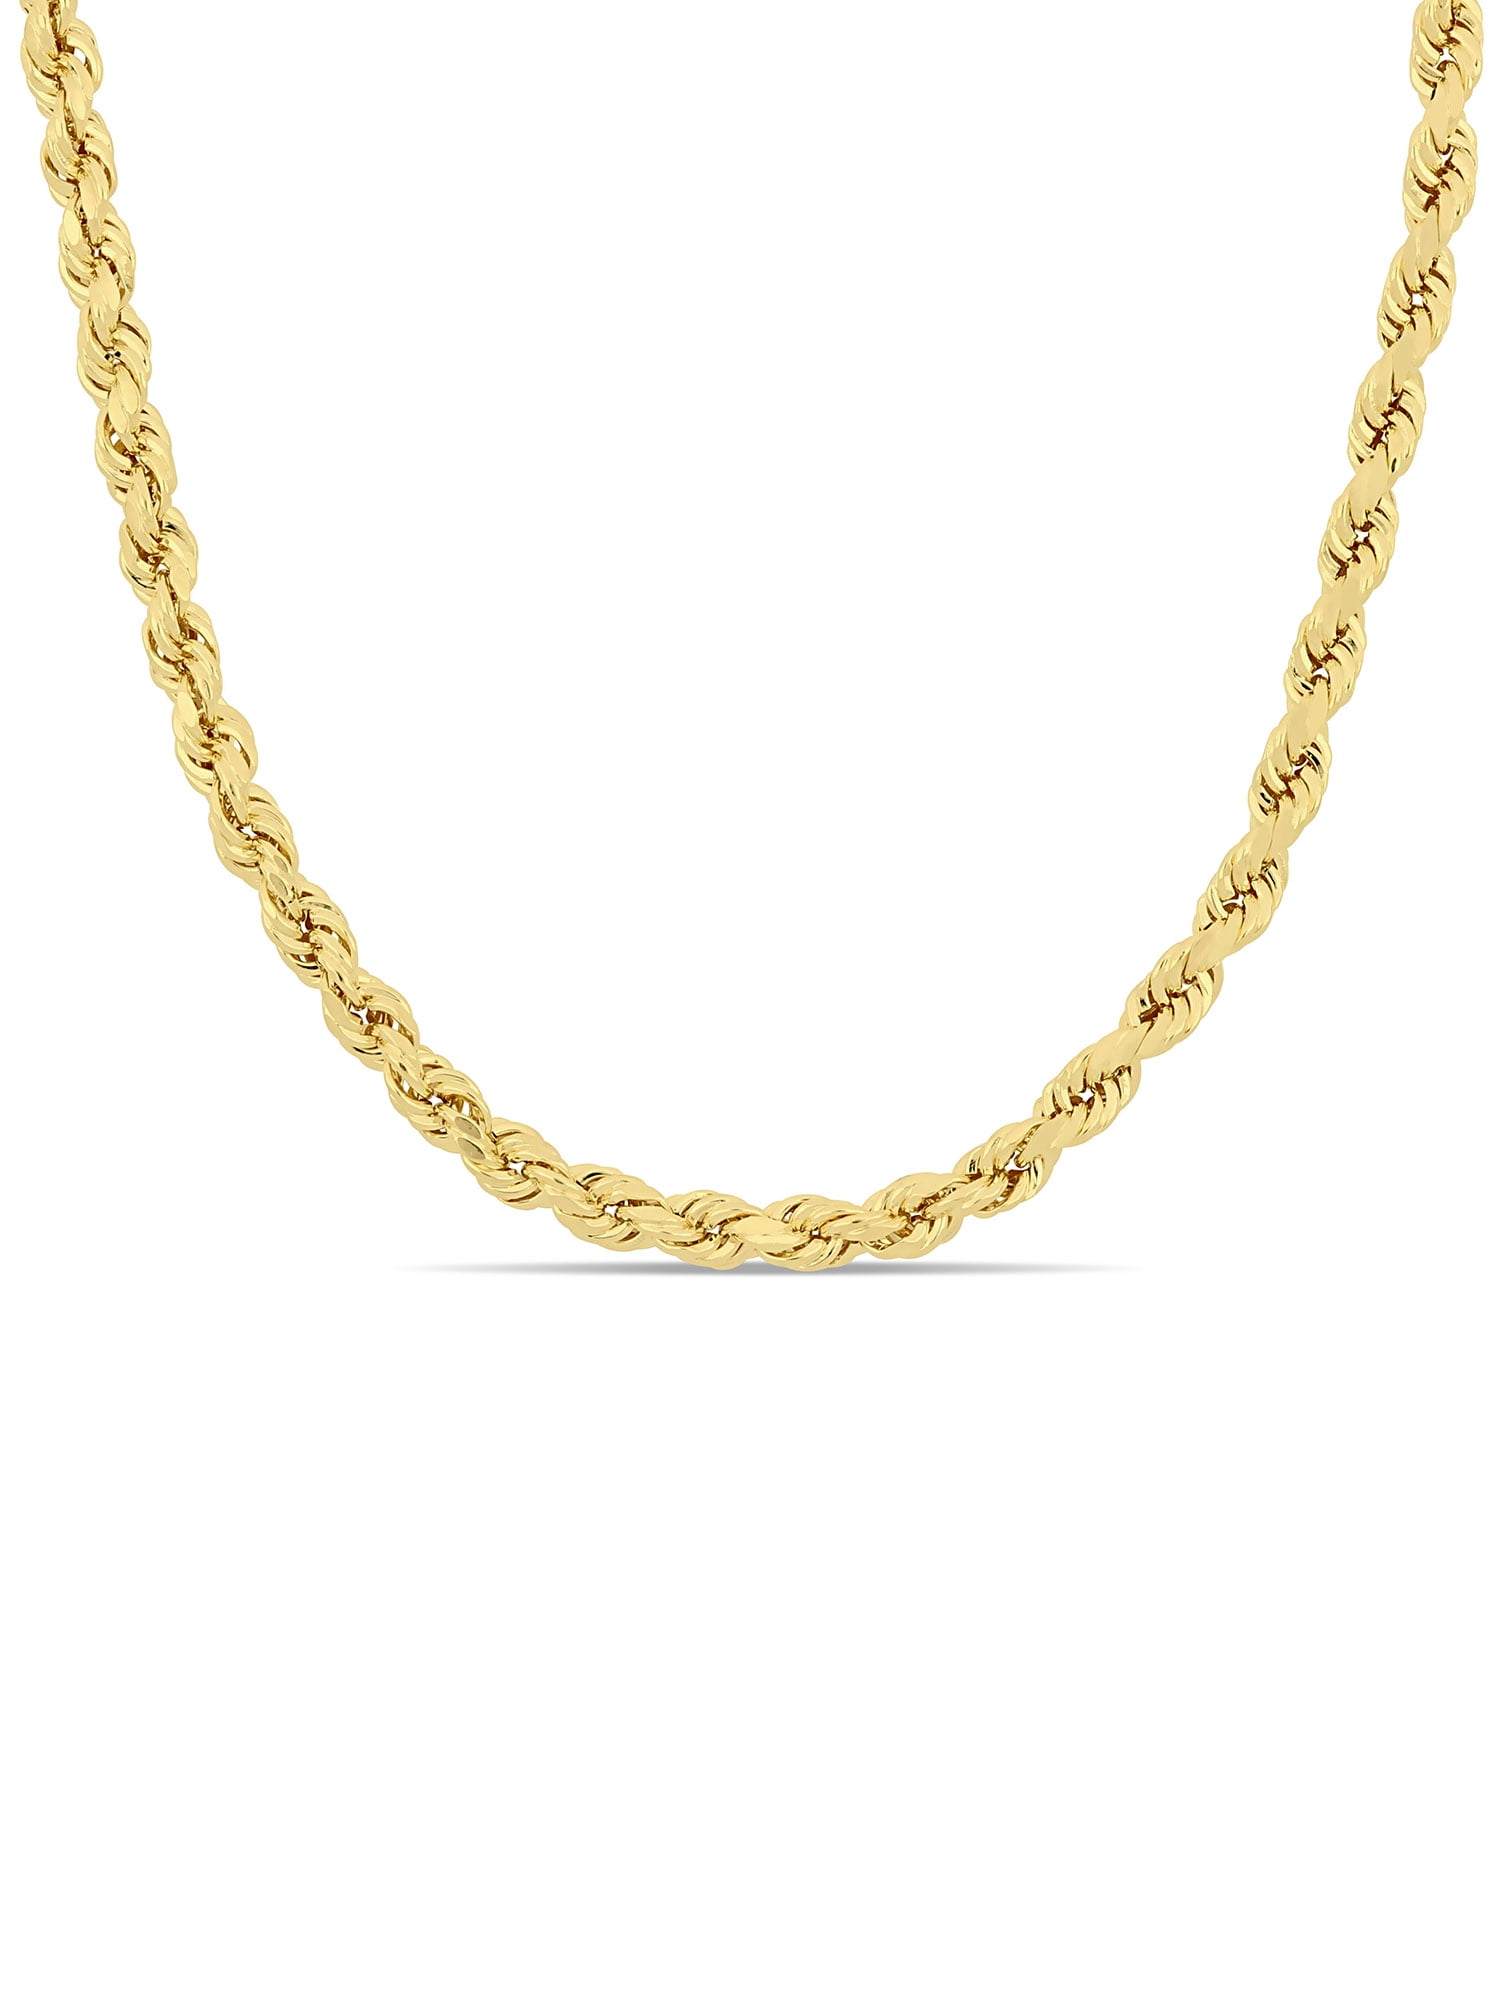 Gem and Harmony 14K Yellow Gold Rope Chain Necklace (24 Inches)